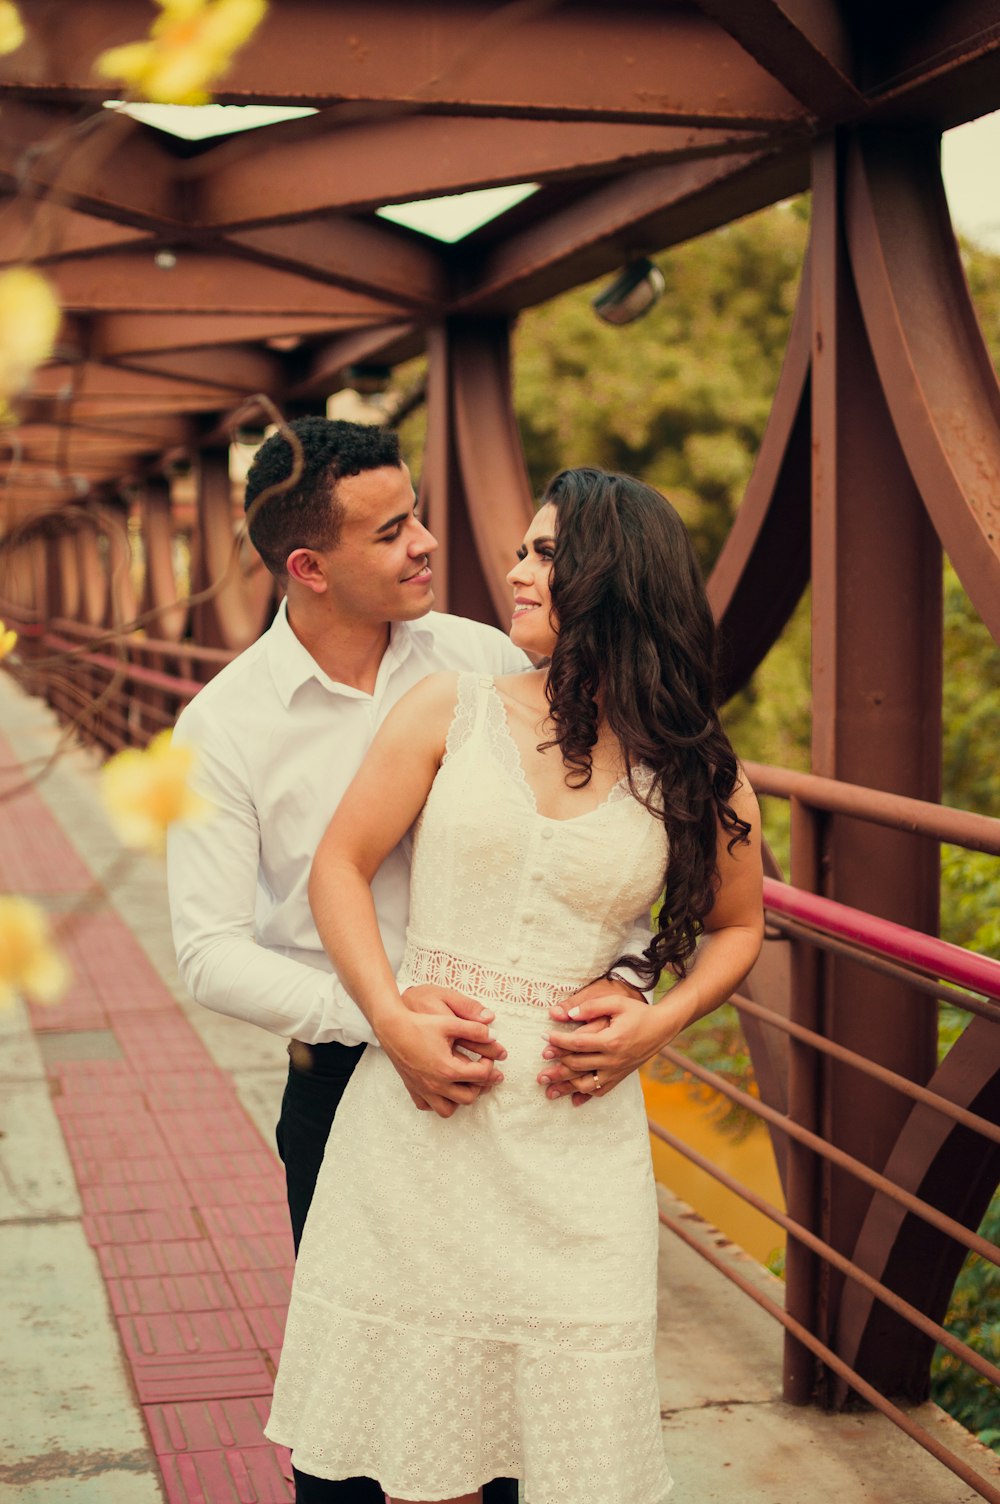 man in white dress shirt and woman in white dress standing on brown wooden bridge during